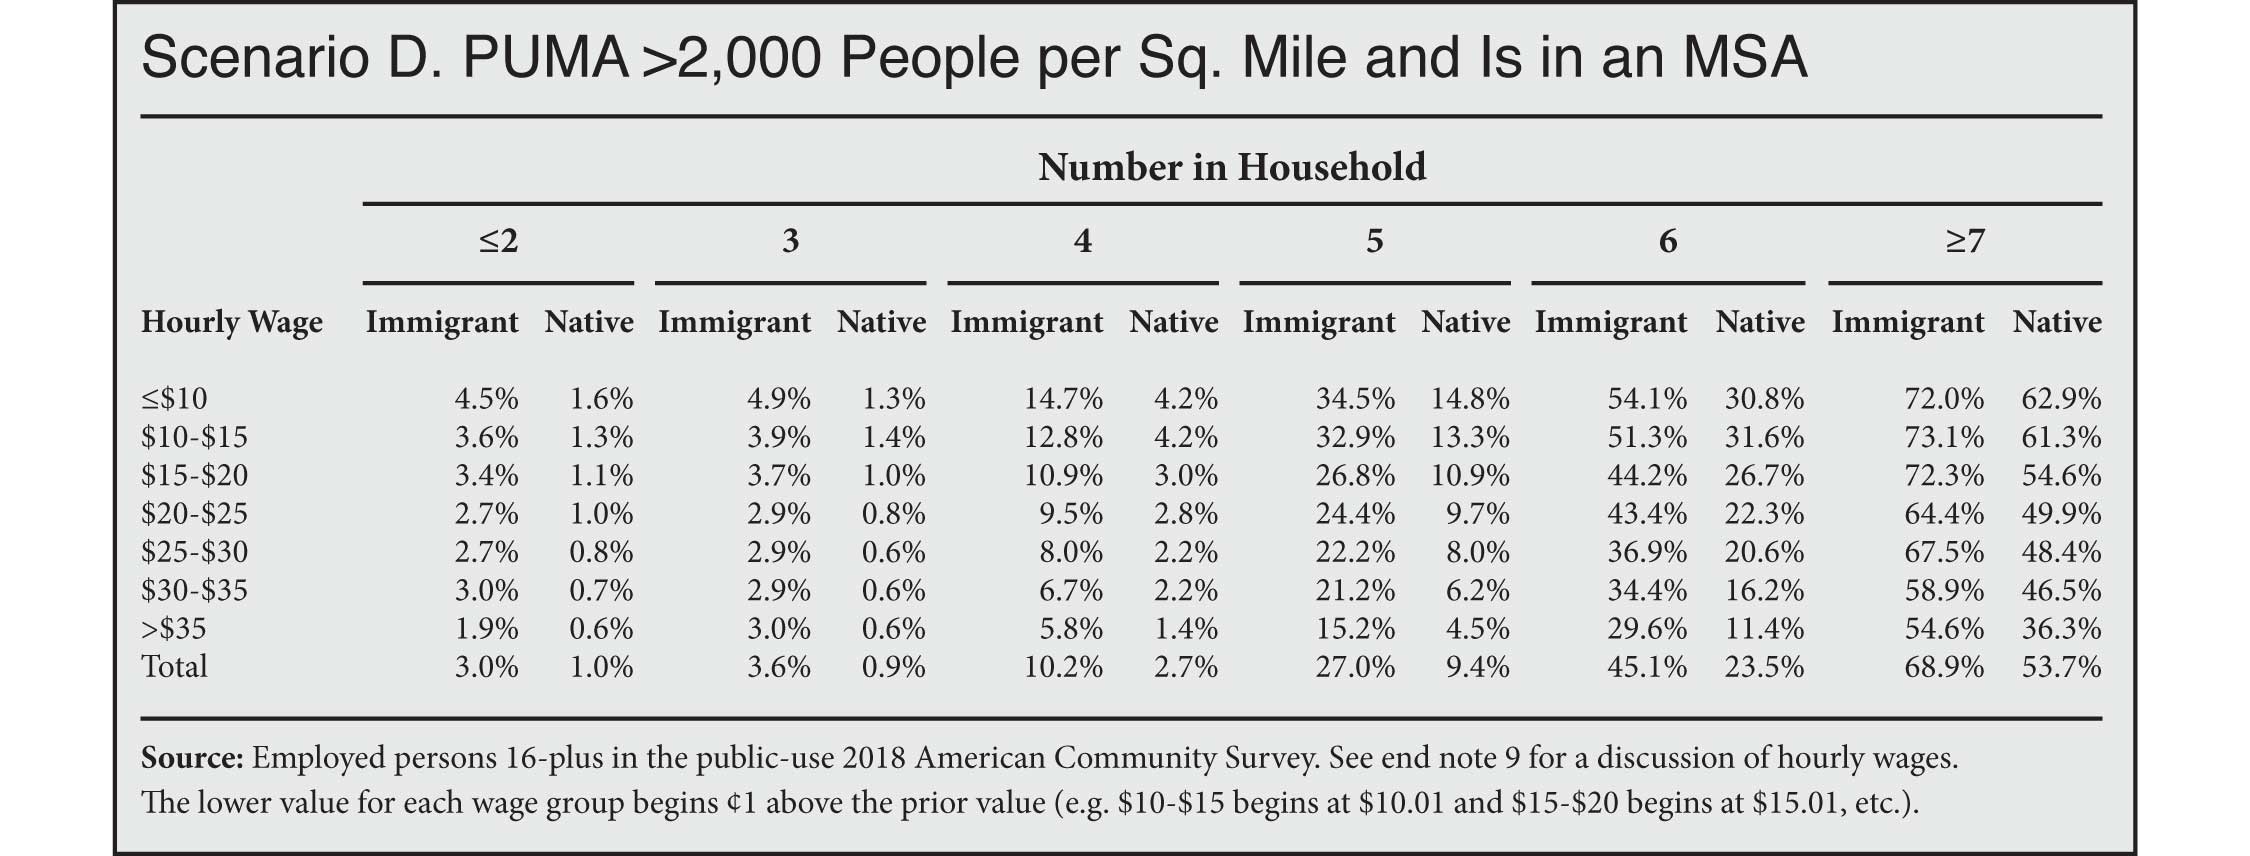 Table: Overcrowding for Immigrant & Native-Born Workers Ages 25 & Older by Wage, Household Size, & Population Density, PUMA >2000 per square mile and is in a MSA